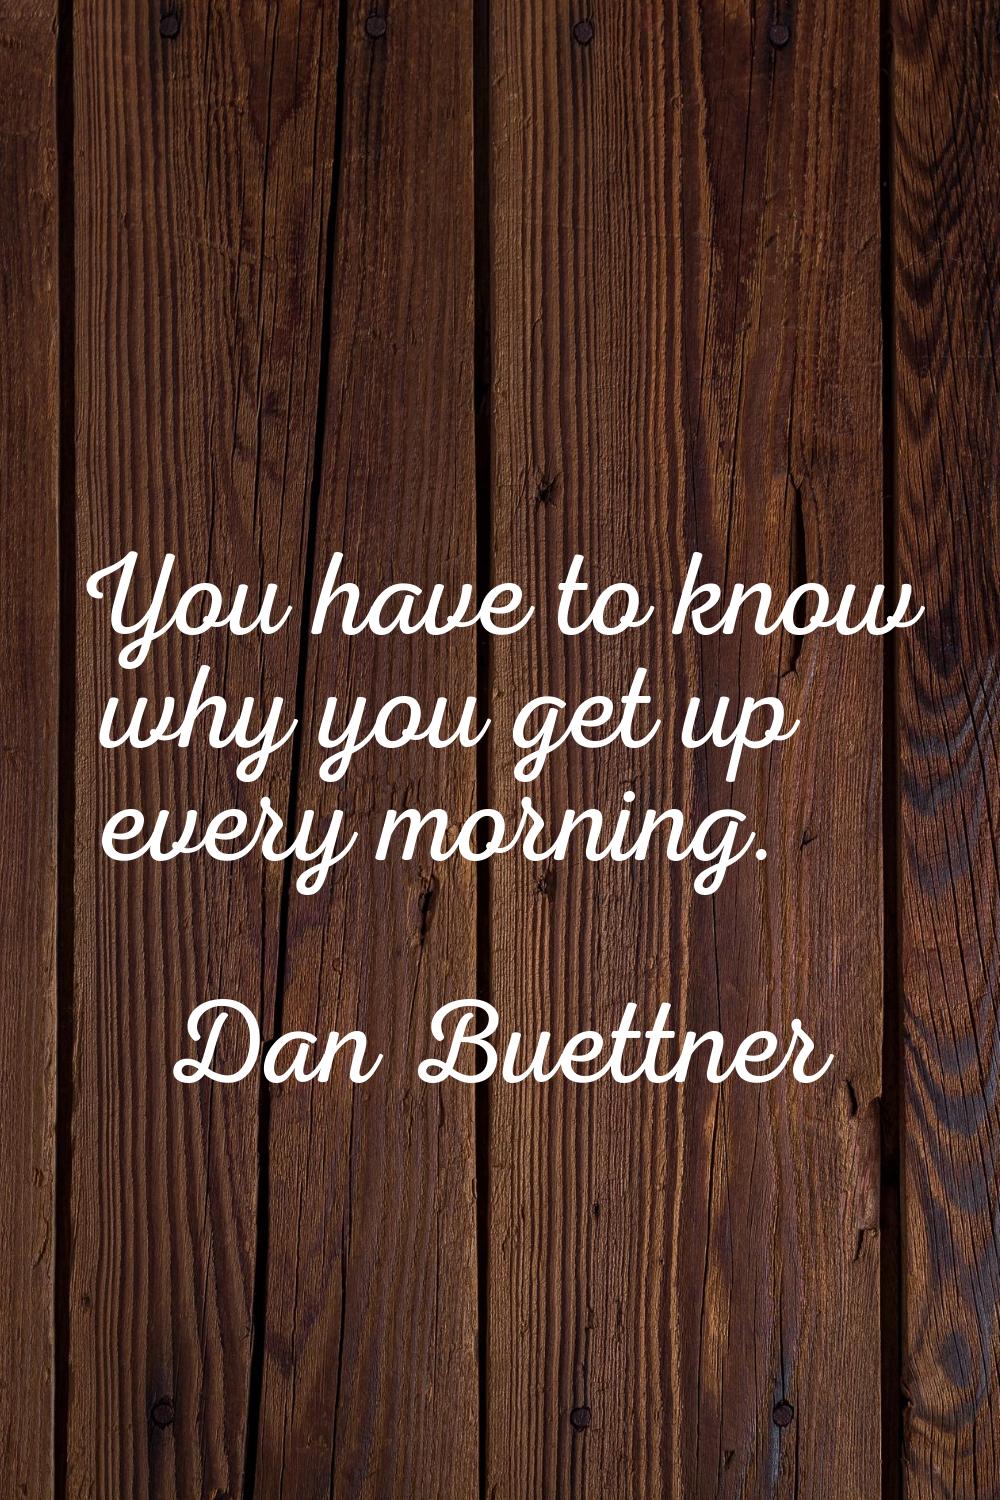 You have to know why you get up every morning.